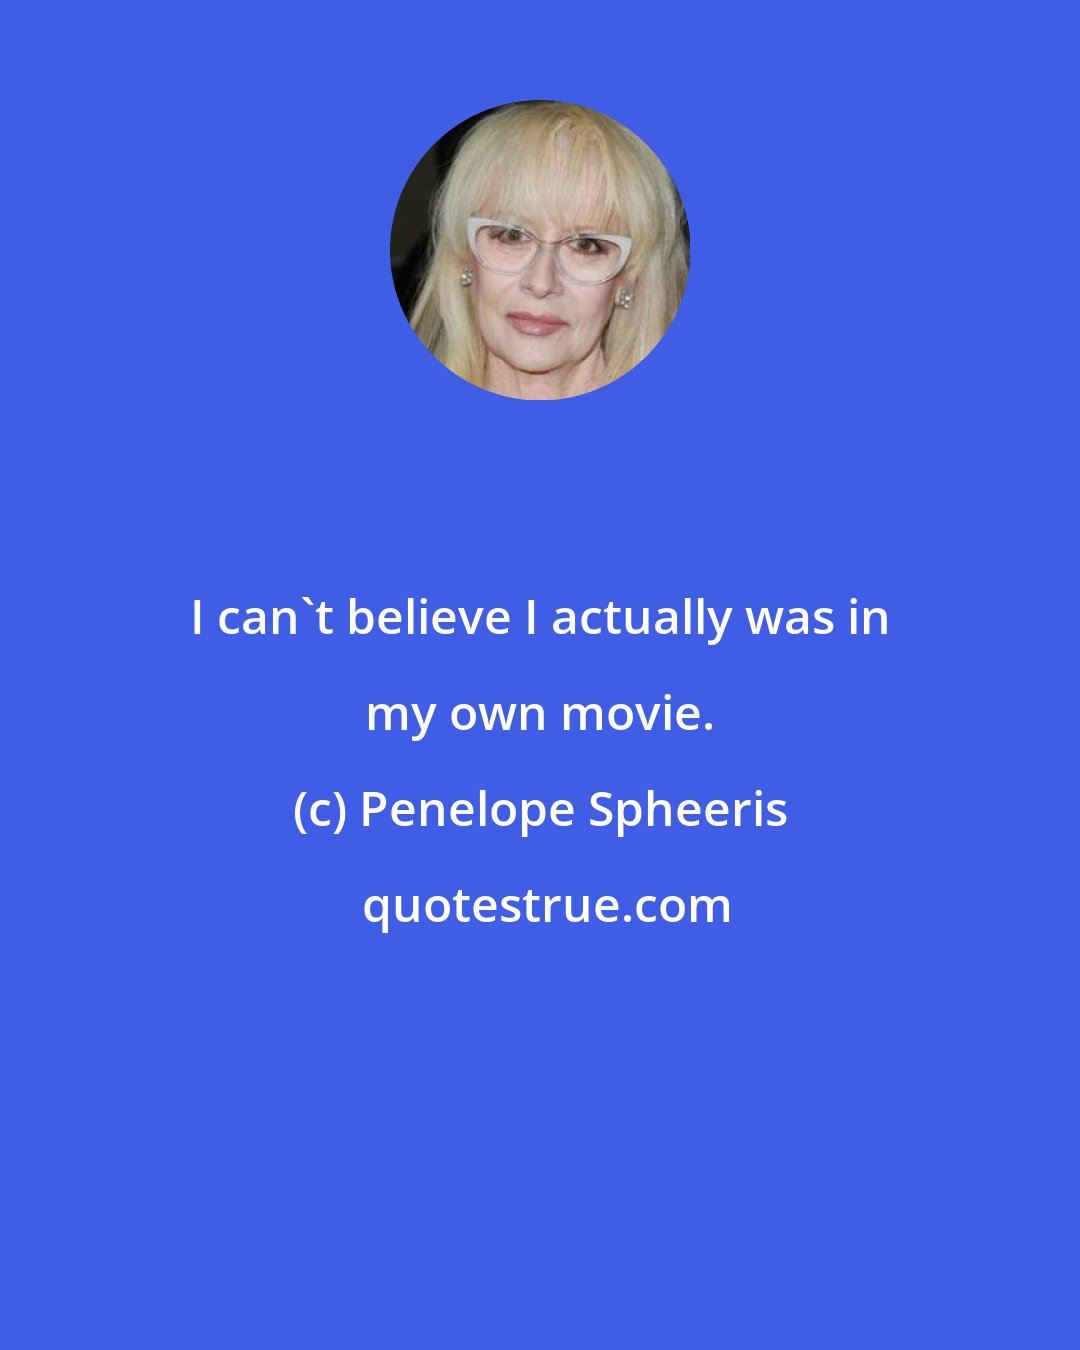 Penelope Spheeris: I can't believe I actually was in my own movie.